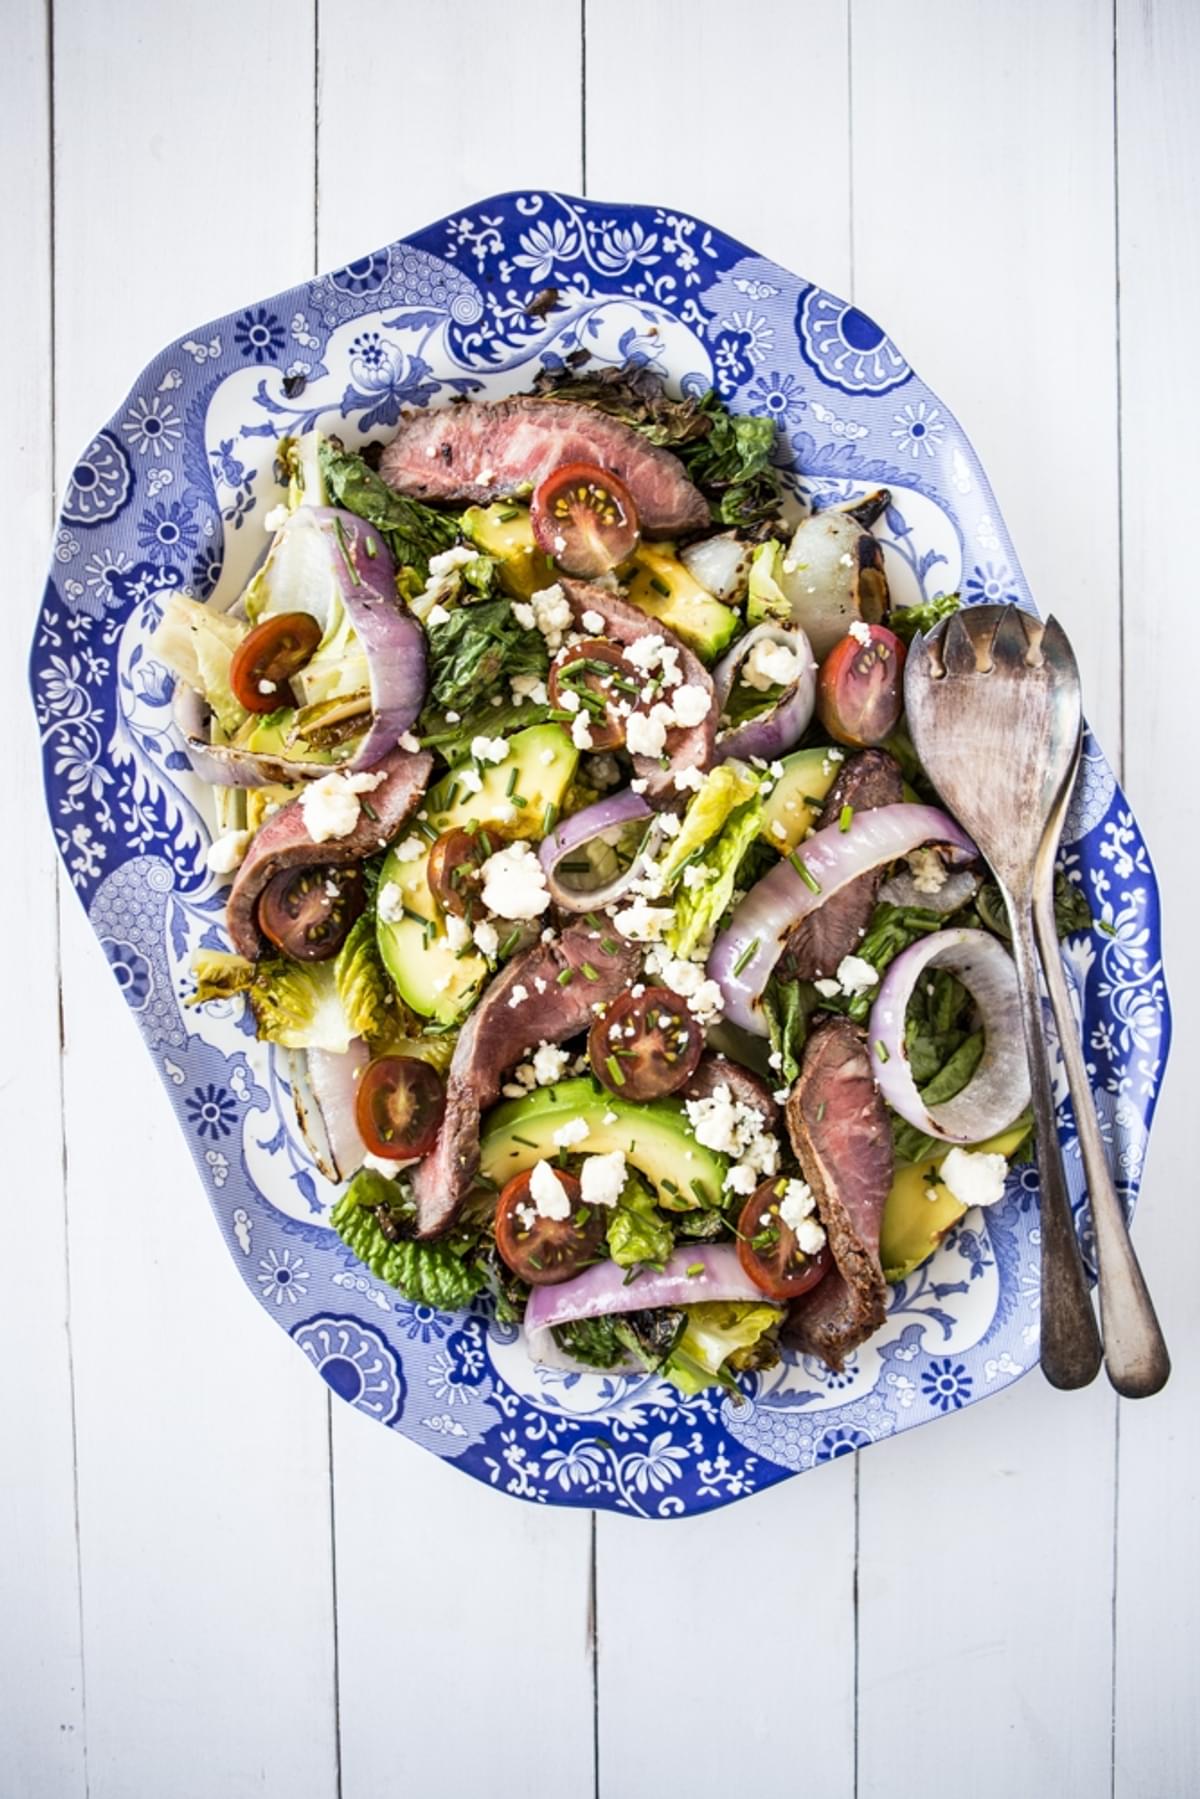 low carb grilled steak salad with grilled onions, lettuce, avocado and a creamy blue cheese dressing